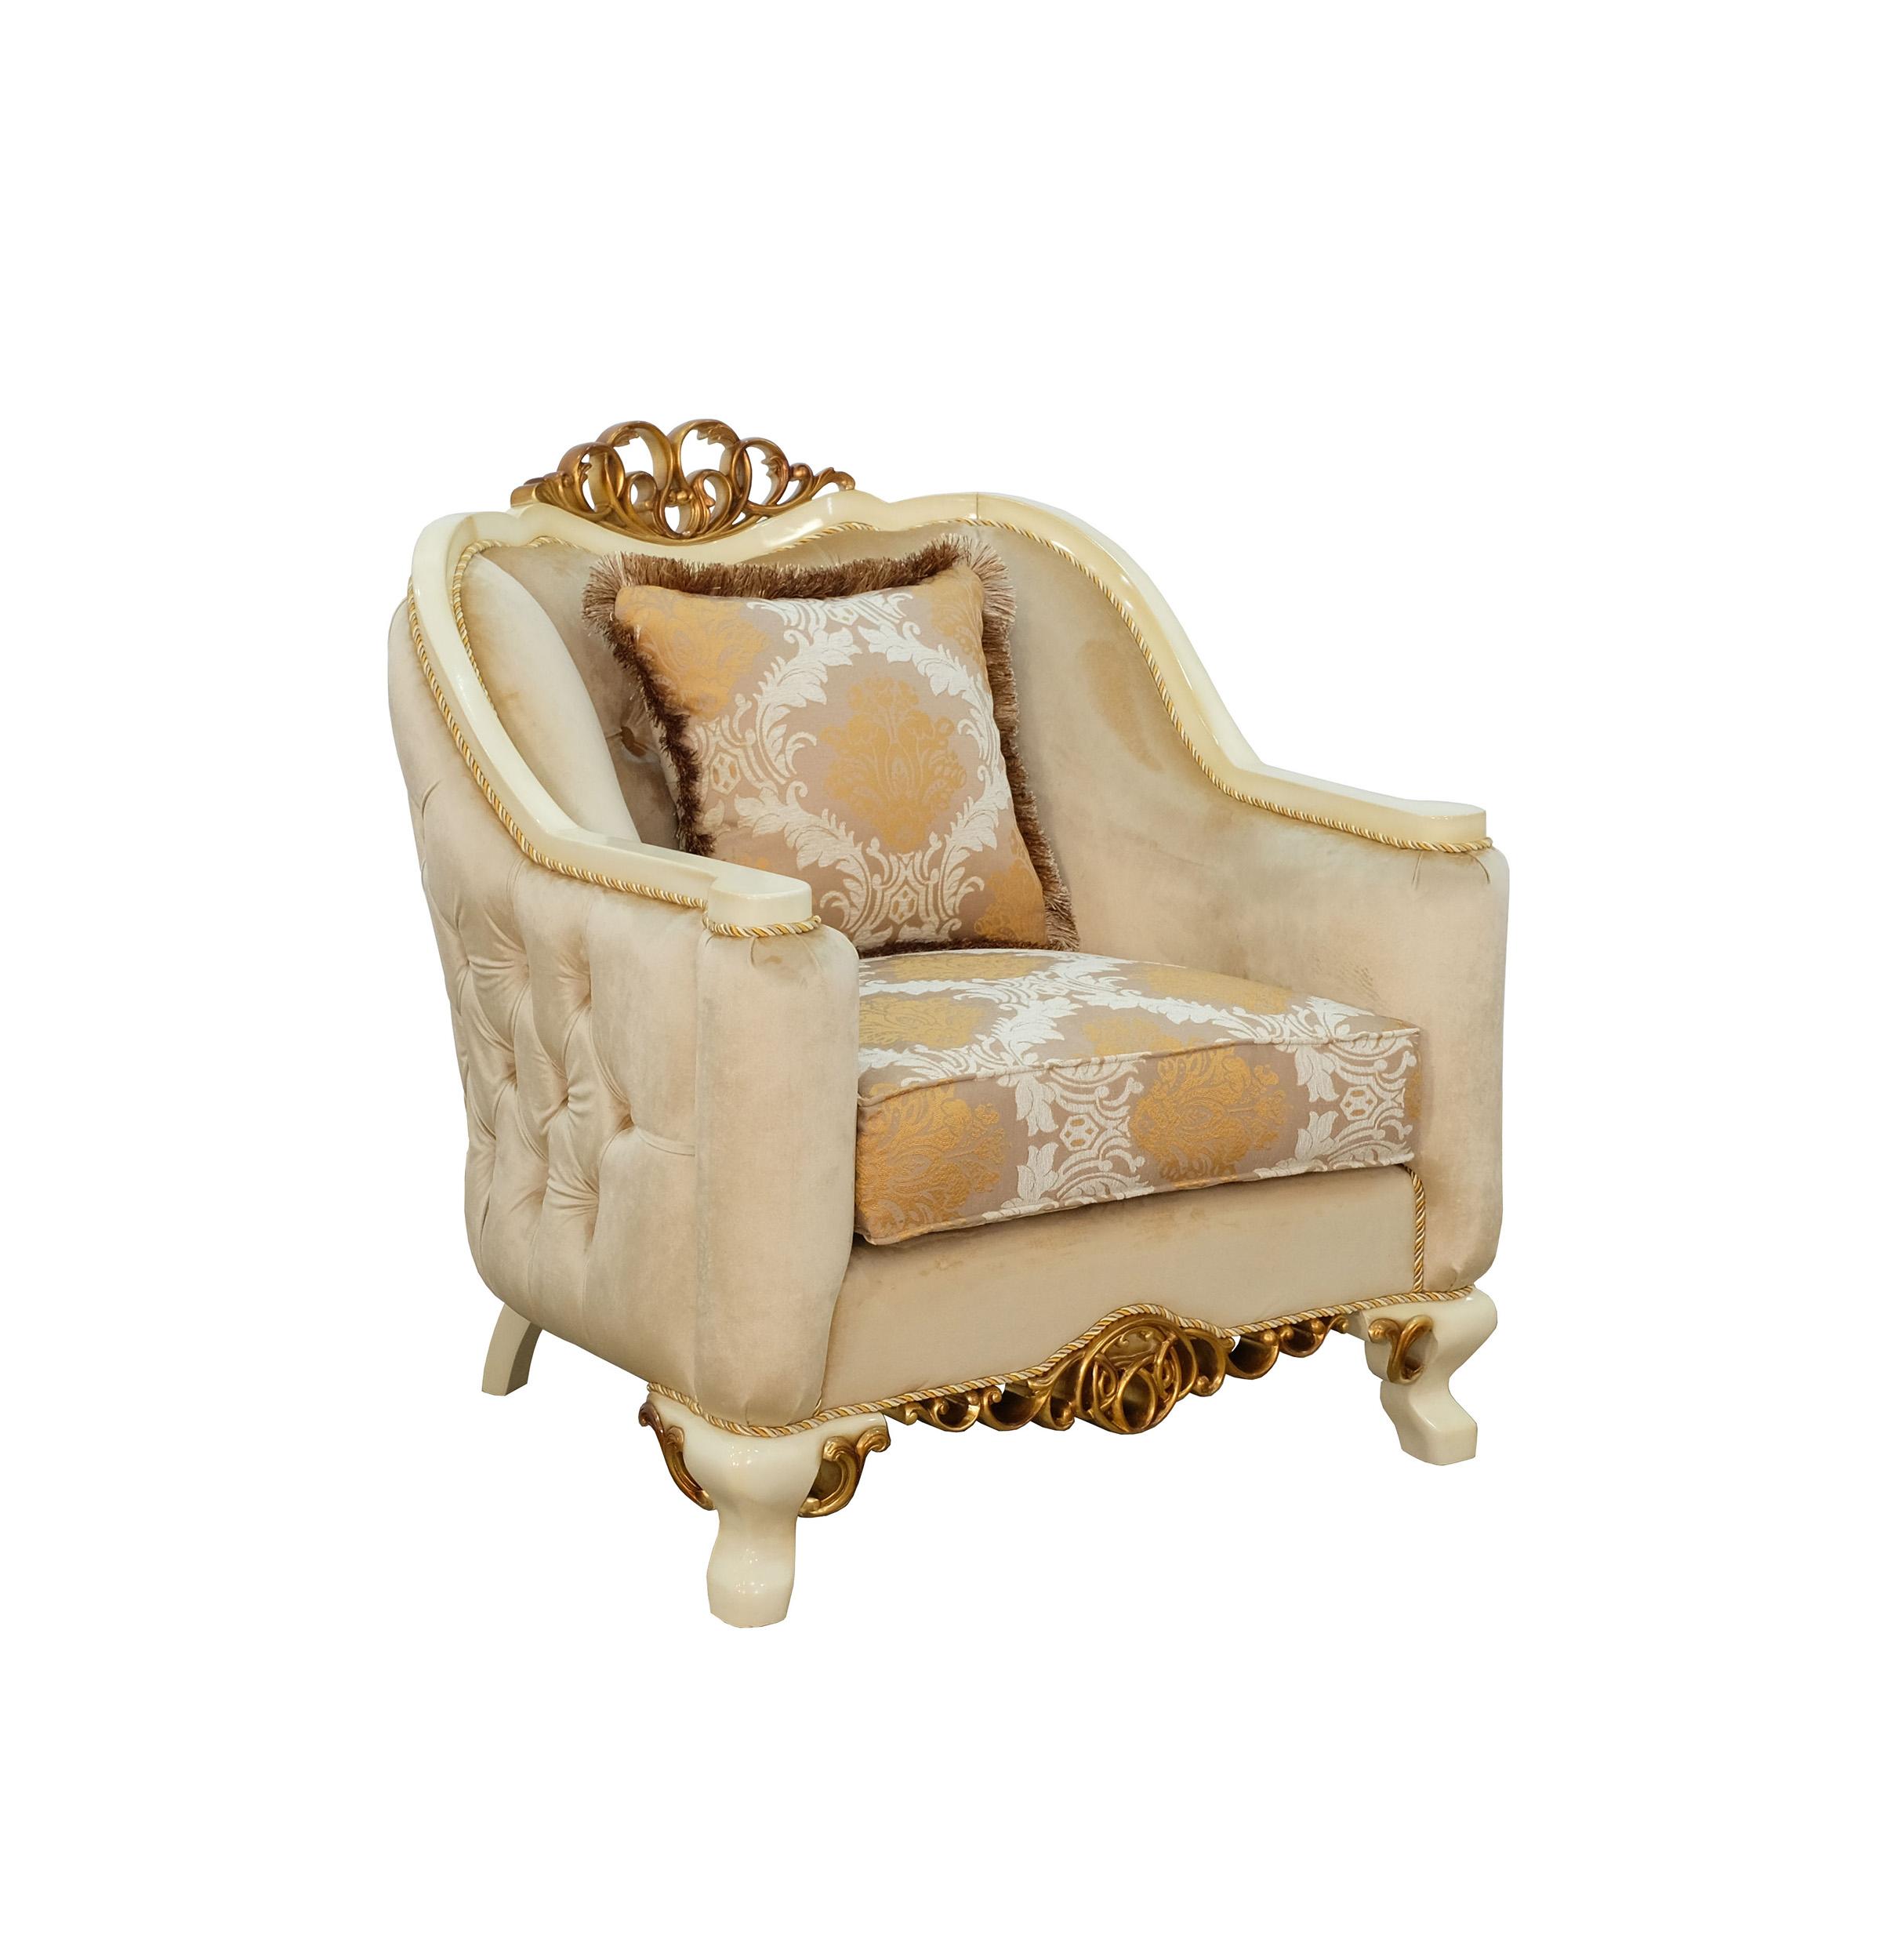 Classic, Traditional Arm Chair ANGELICA 45352-C in Antique, Gold, Beige Fabric